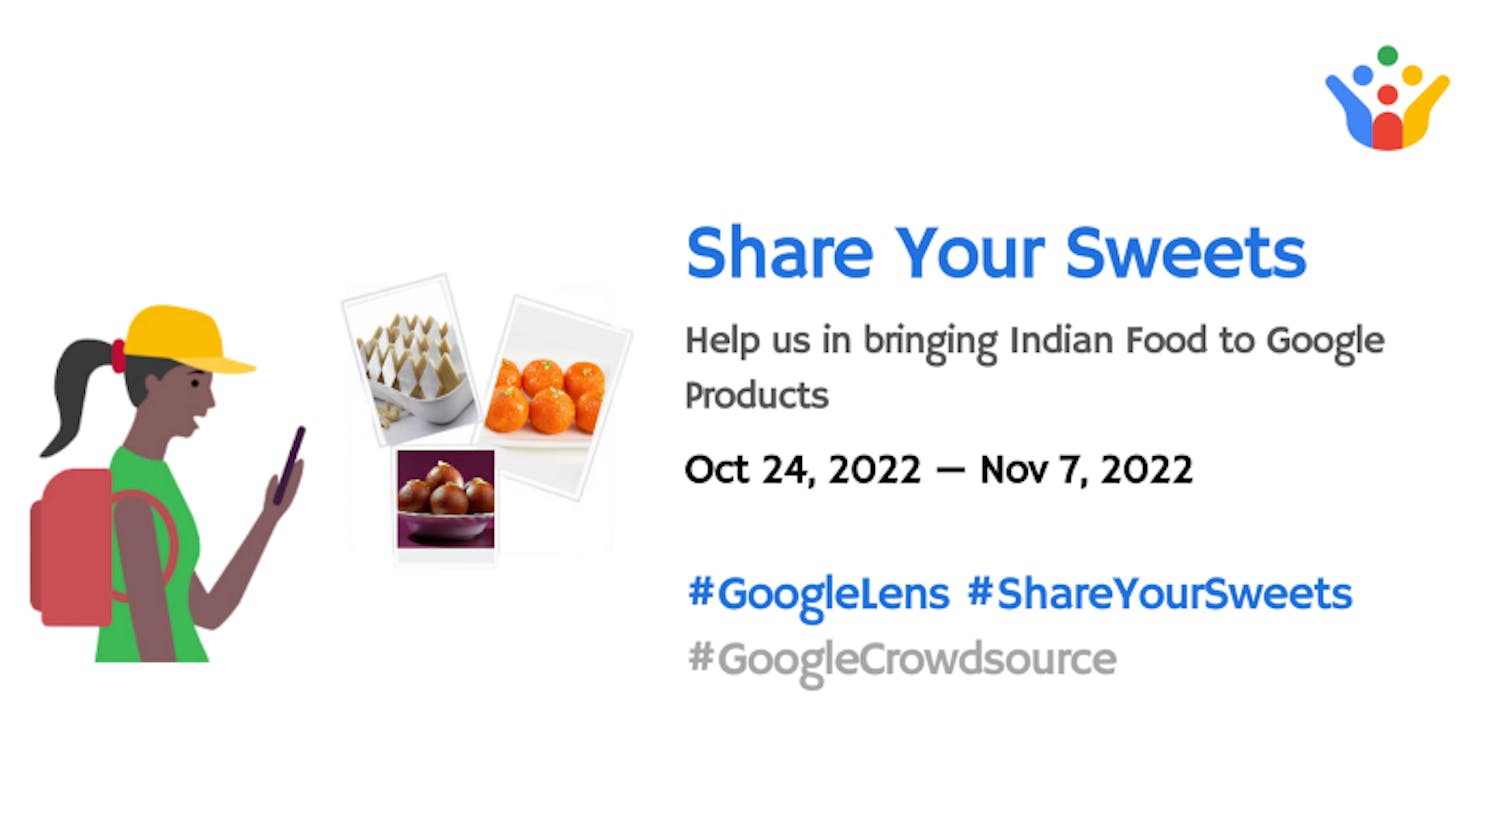 Share Your Sweets by Google Crowdsource